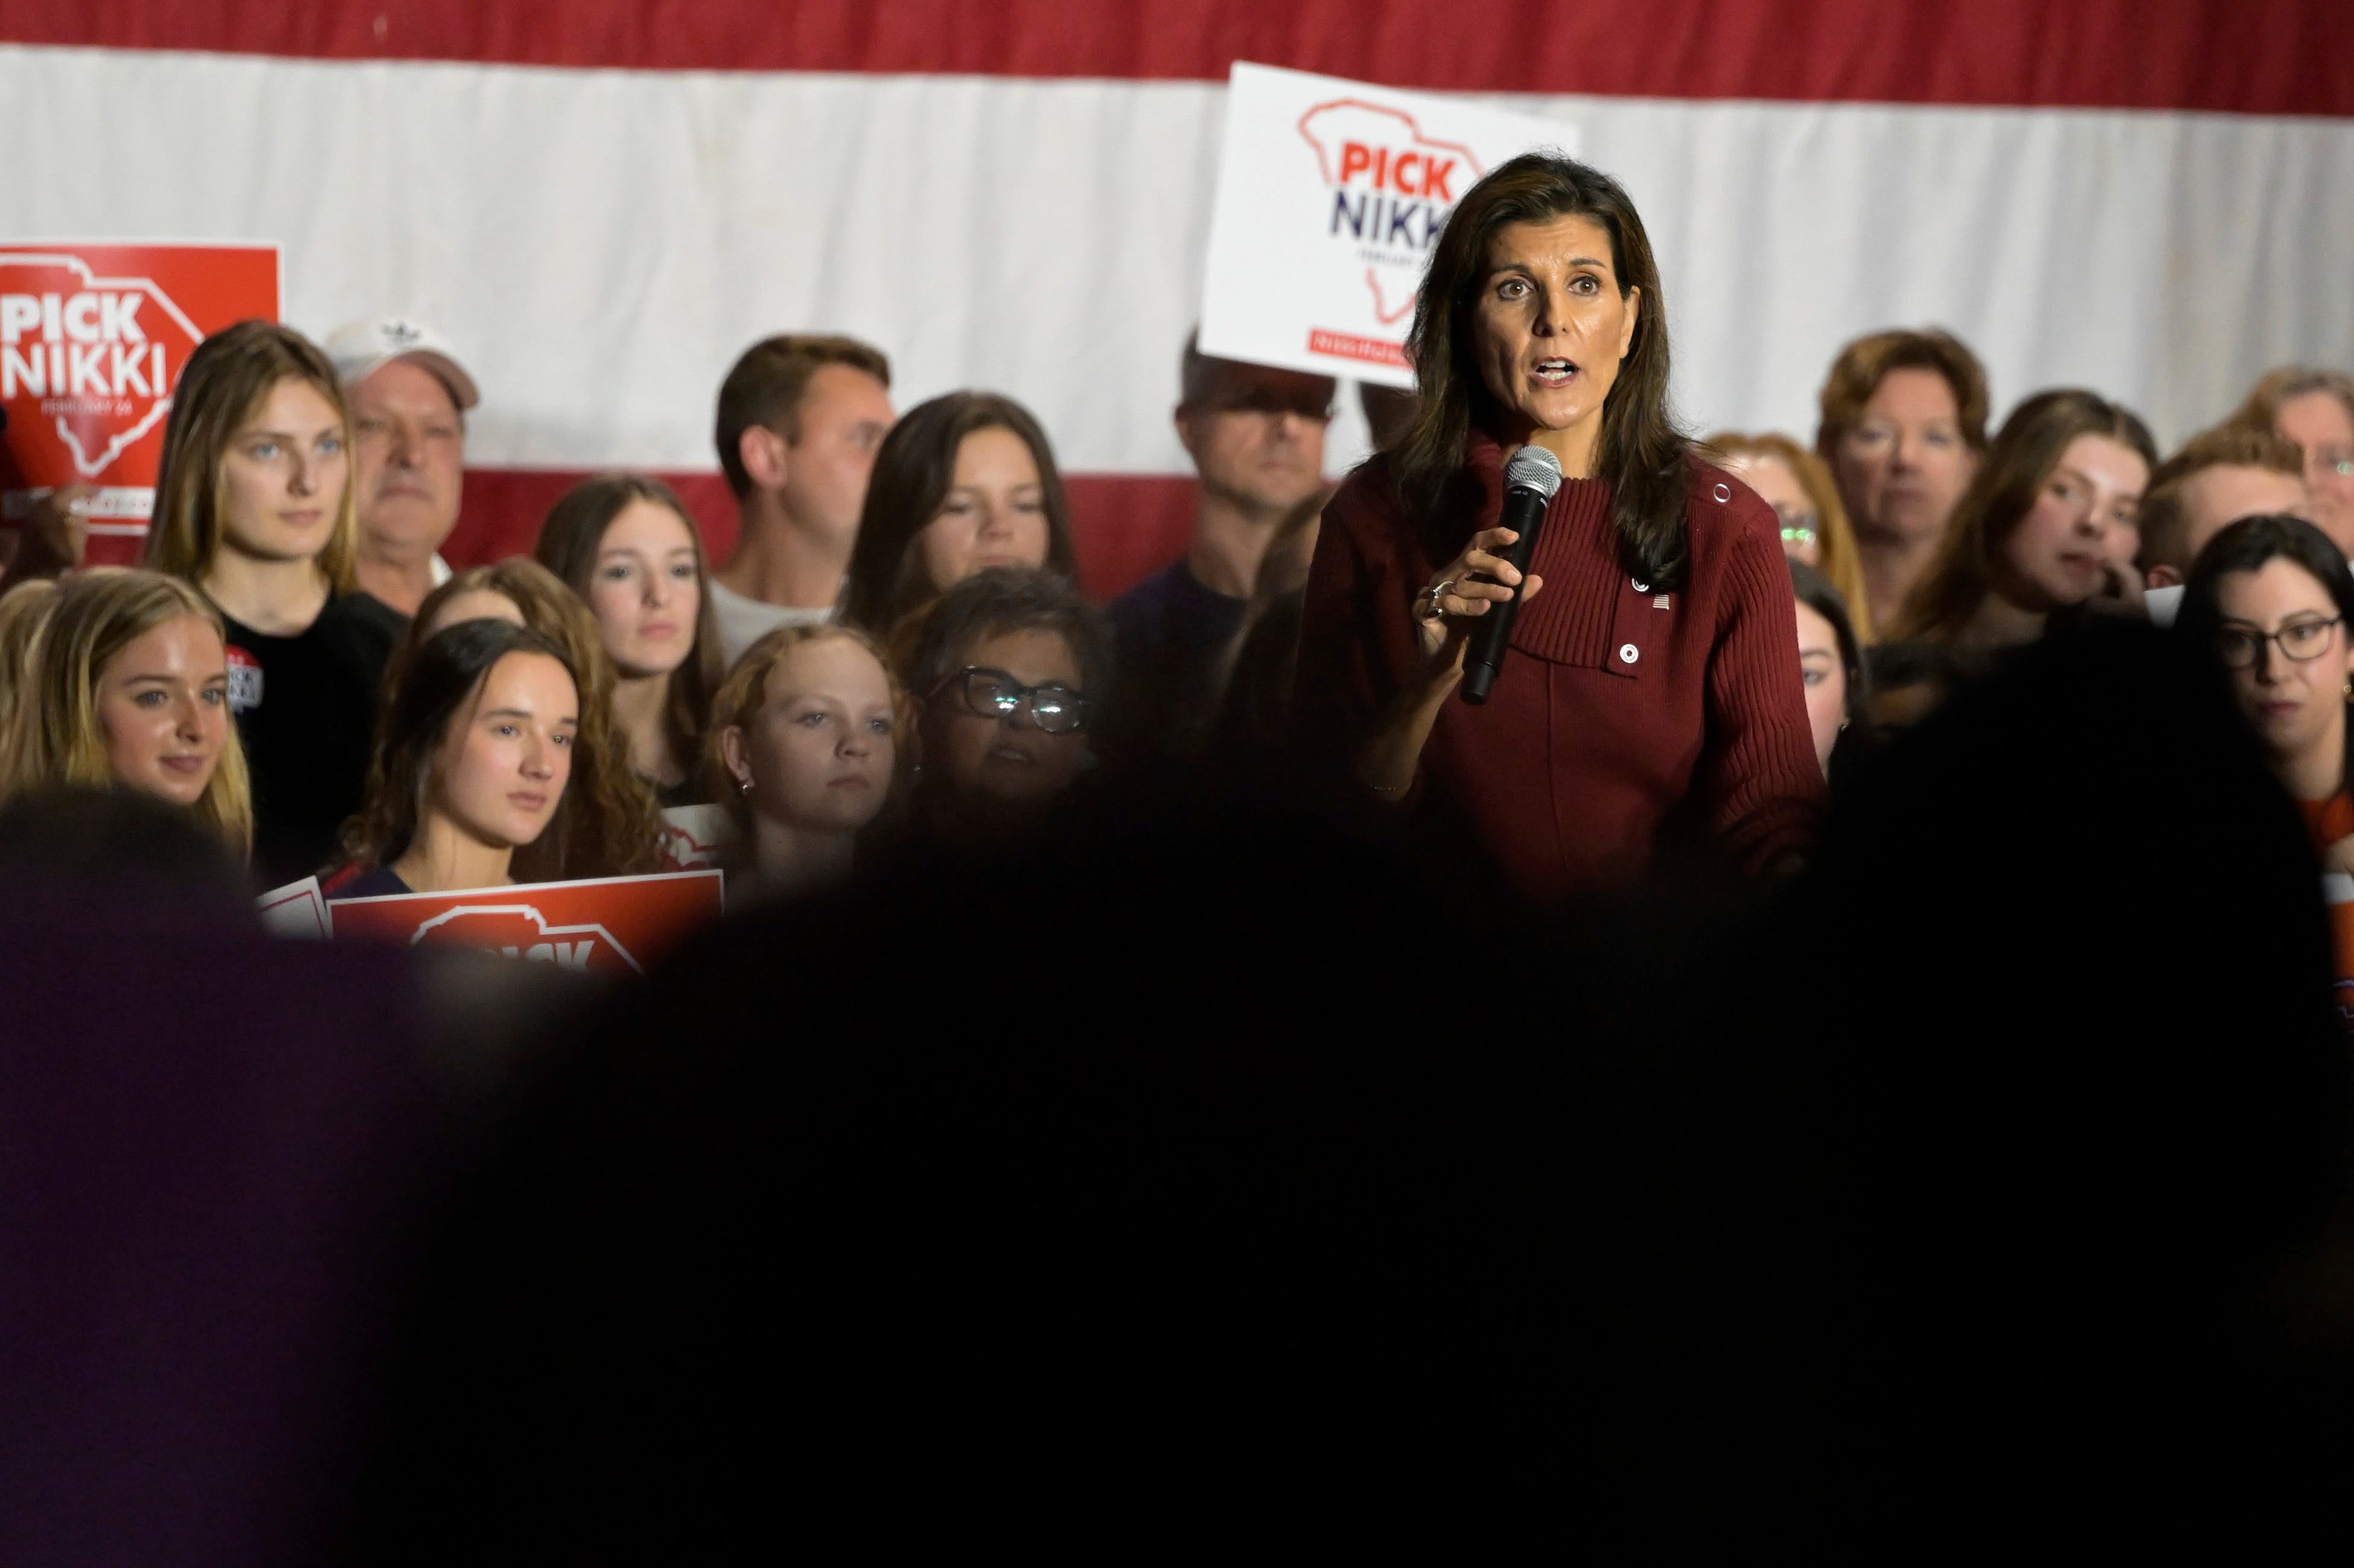 how donald trump’s shadow could eclipse nikki haley’s super tuesday efforts